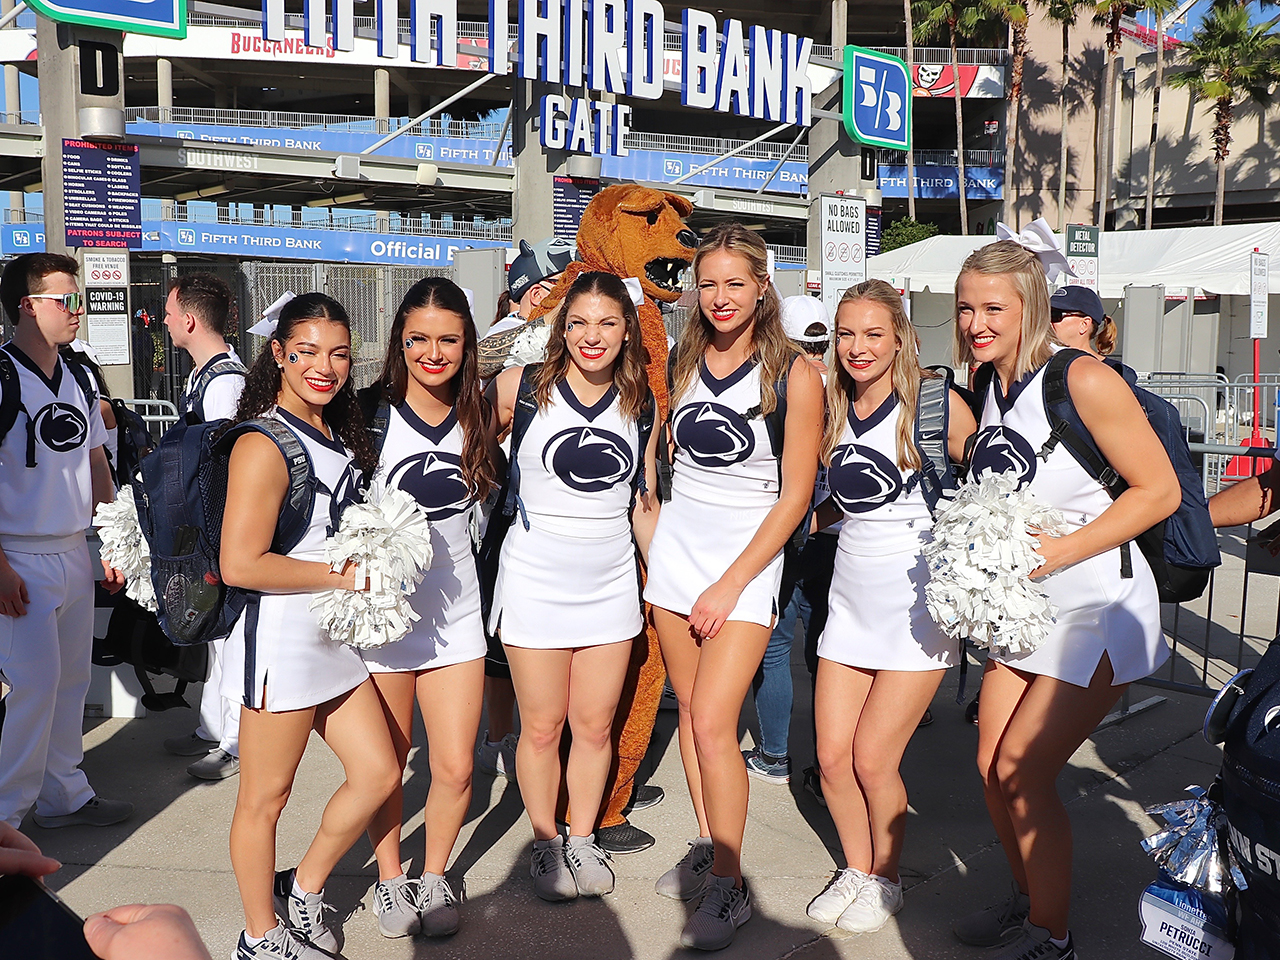 Penn State Cheerleaders and band stopped by the Bash 